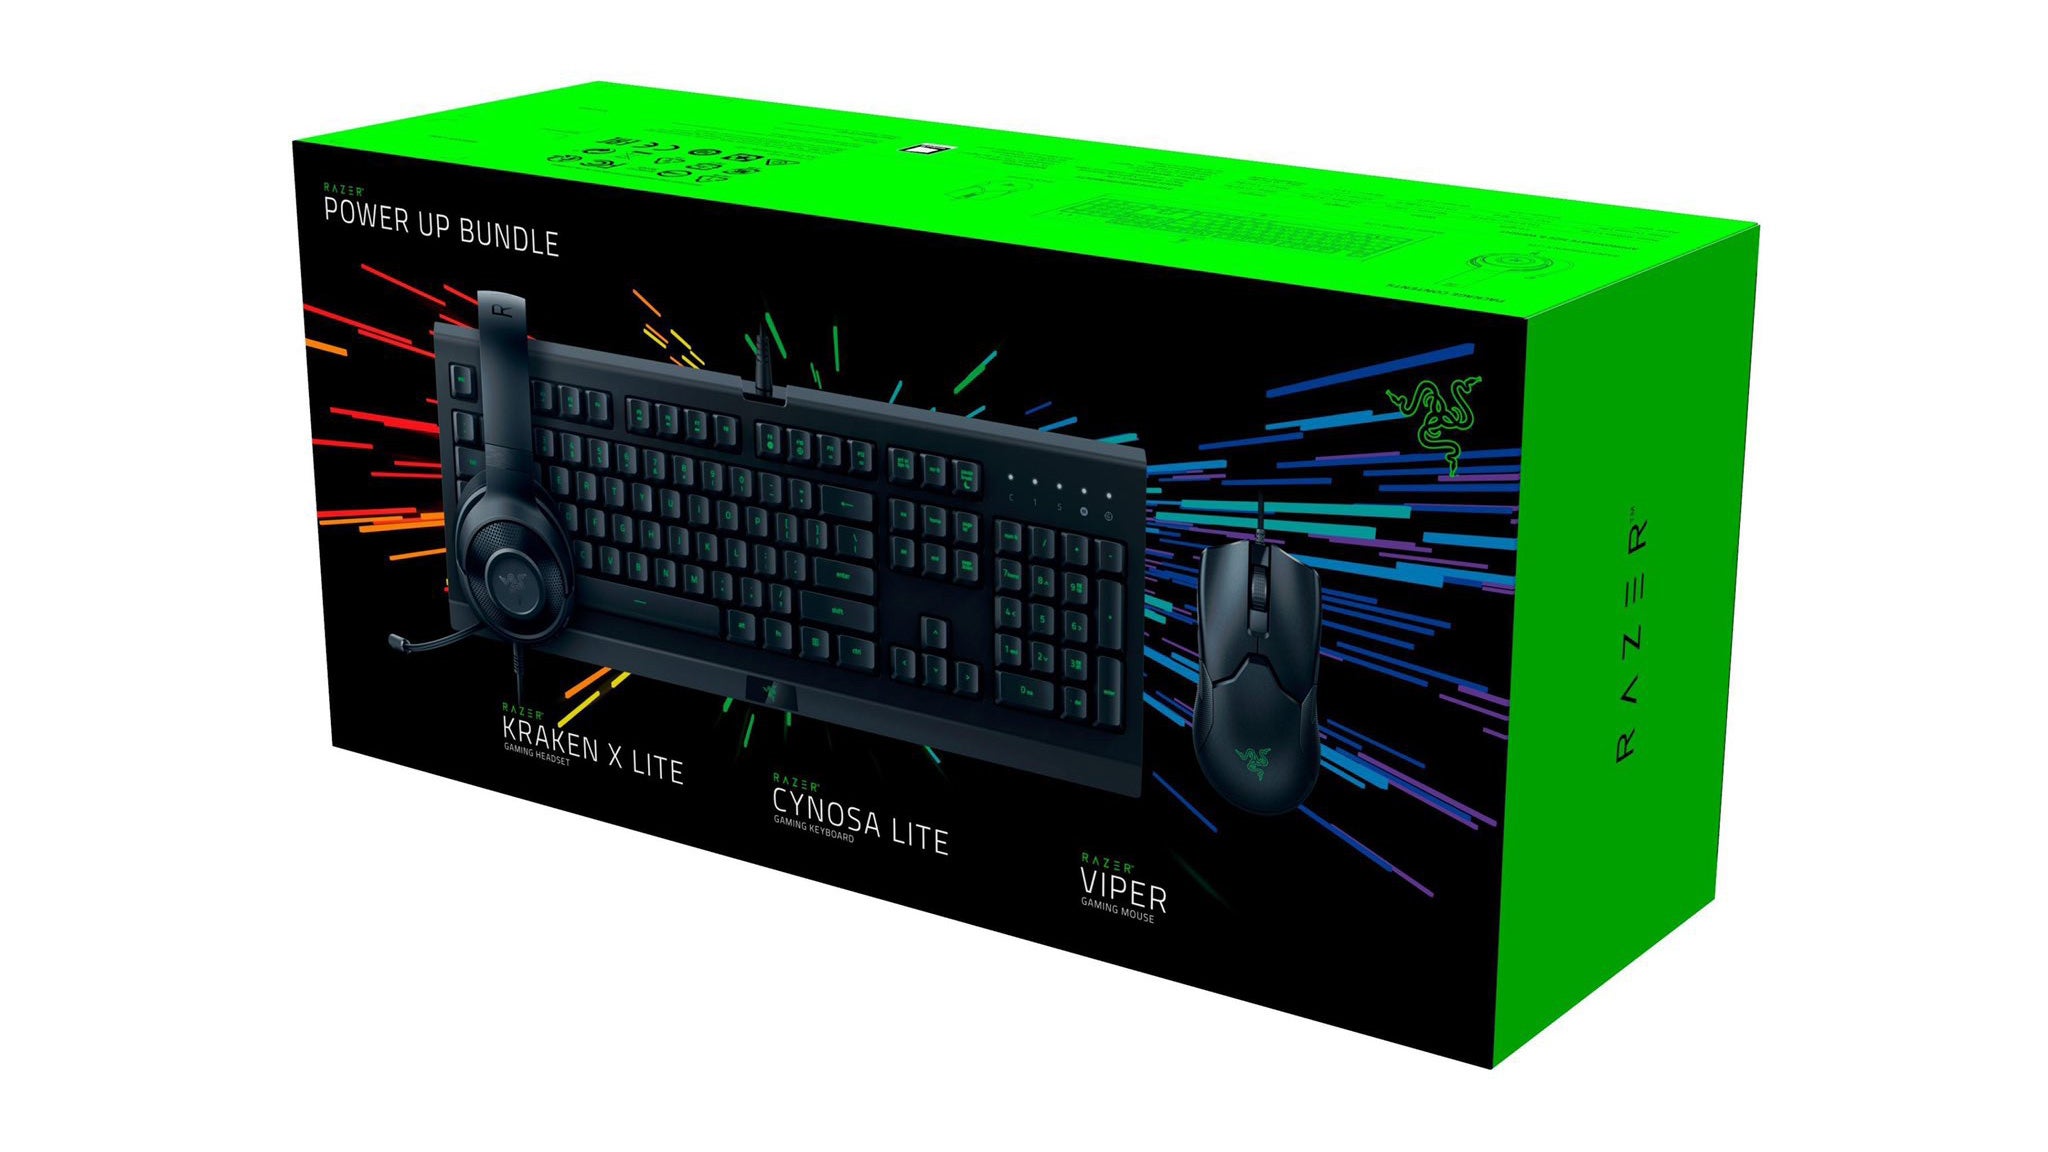 a photo of a box of PC peripherals by Razer, including a Kraken X Lite headset, Cynosa Lite keyboard and Viper mouse